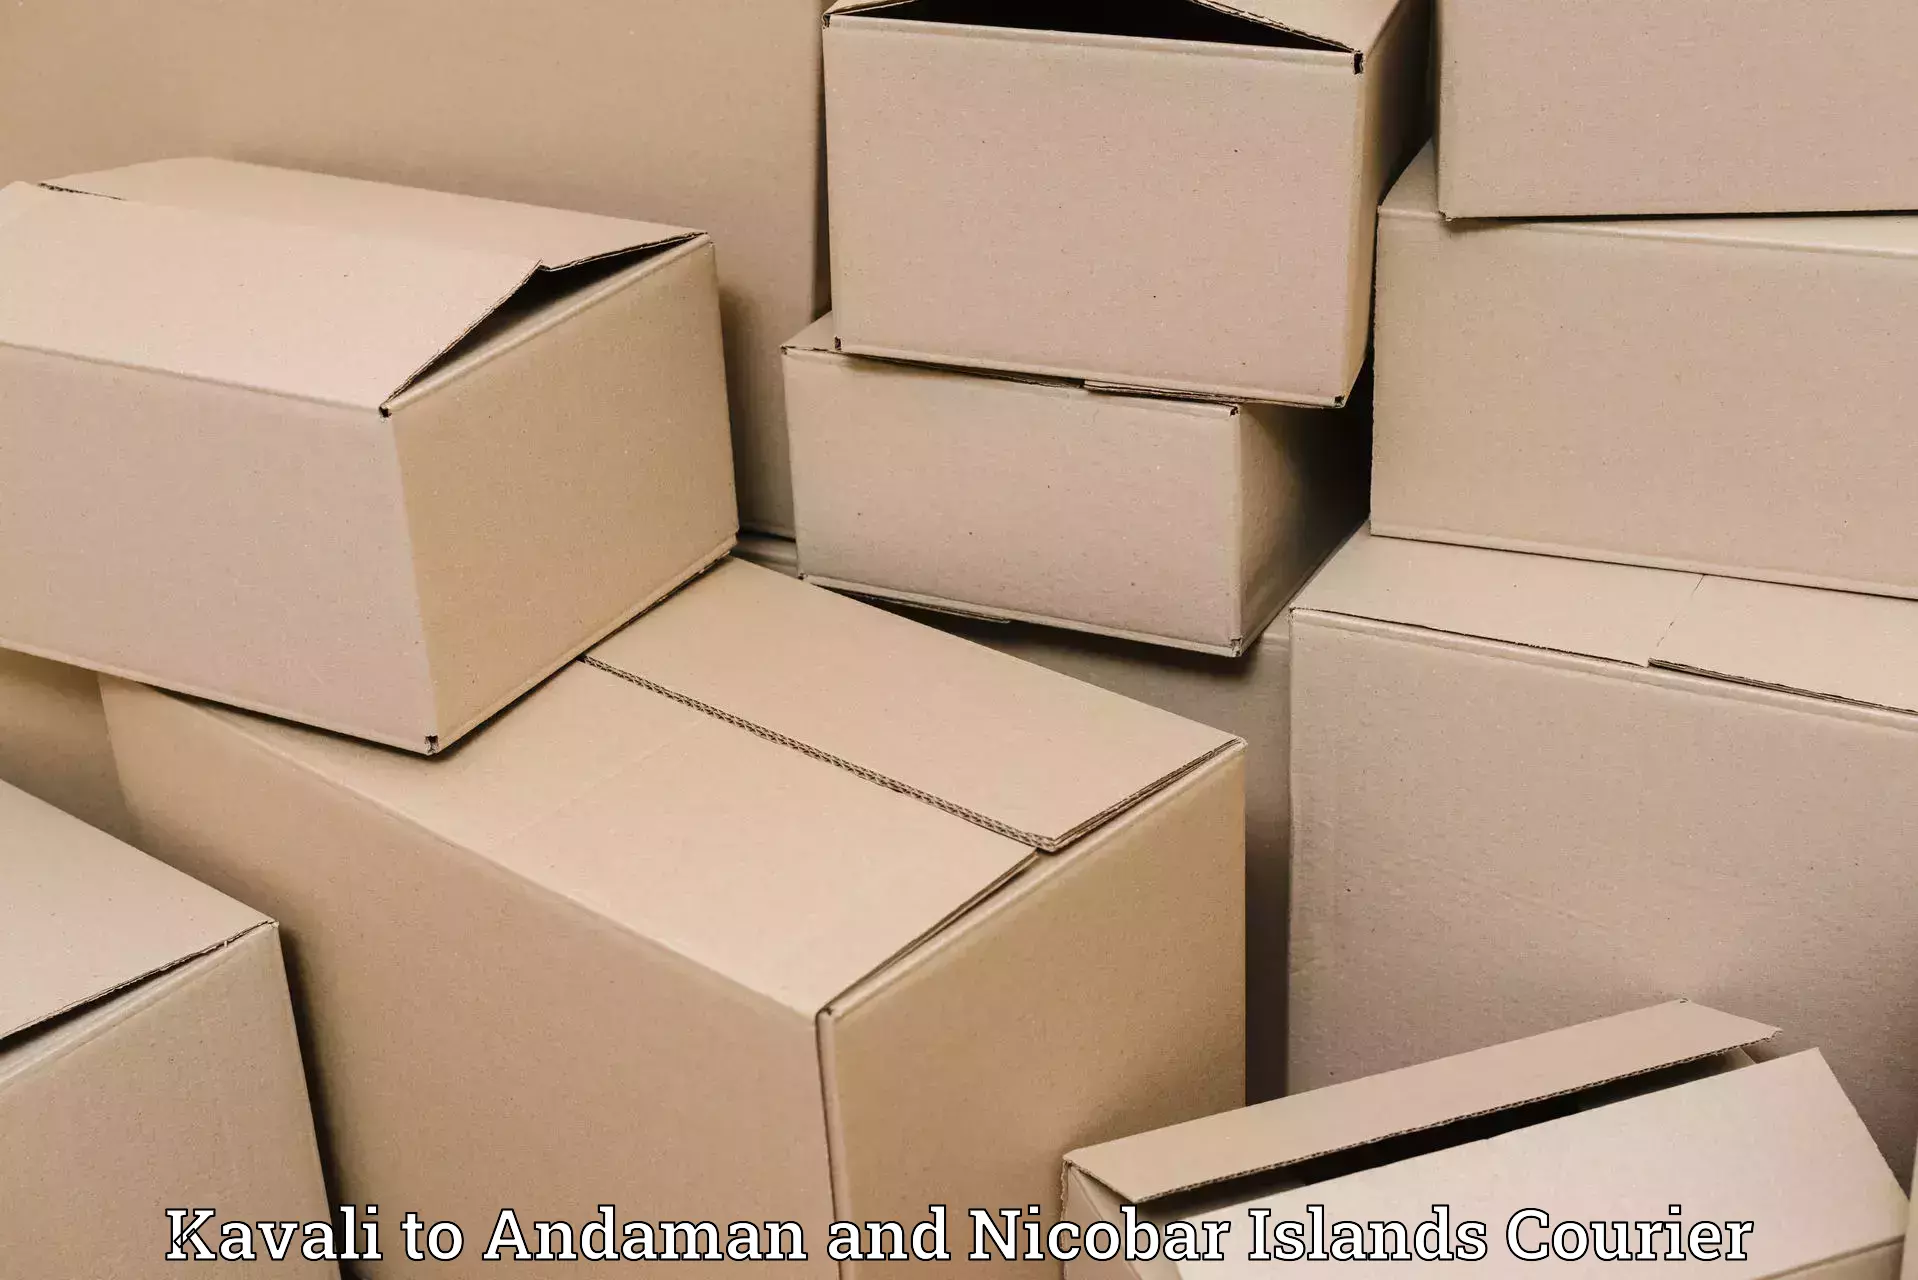 Customized shipping options in Kavali to Andaman and Nicobar Islands